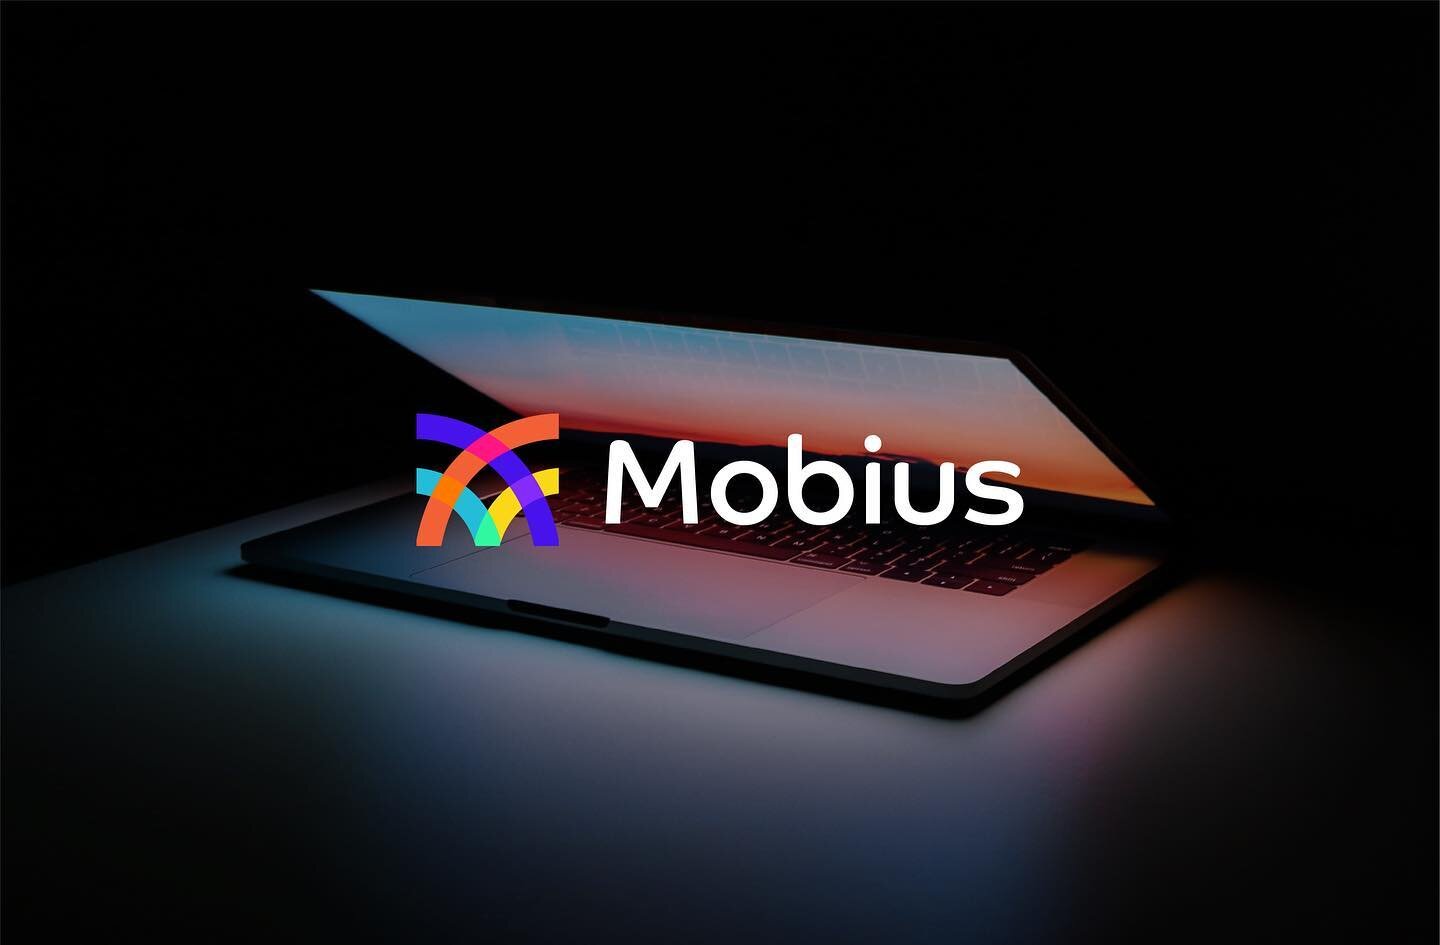 Mobius I.T. re-brand project! Swipe to see where we are and where we started (at the end). The Mobius logo is clean and modern while speaking to their services in a subtle way. The mark uses Wi-Fi signals to create an eye-catching design that makes a